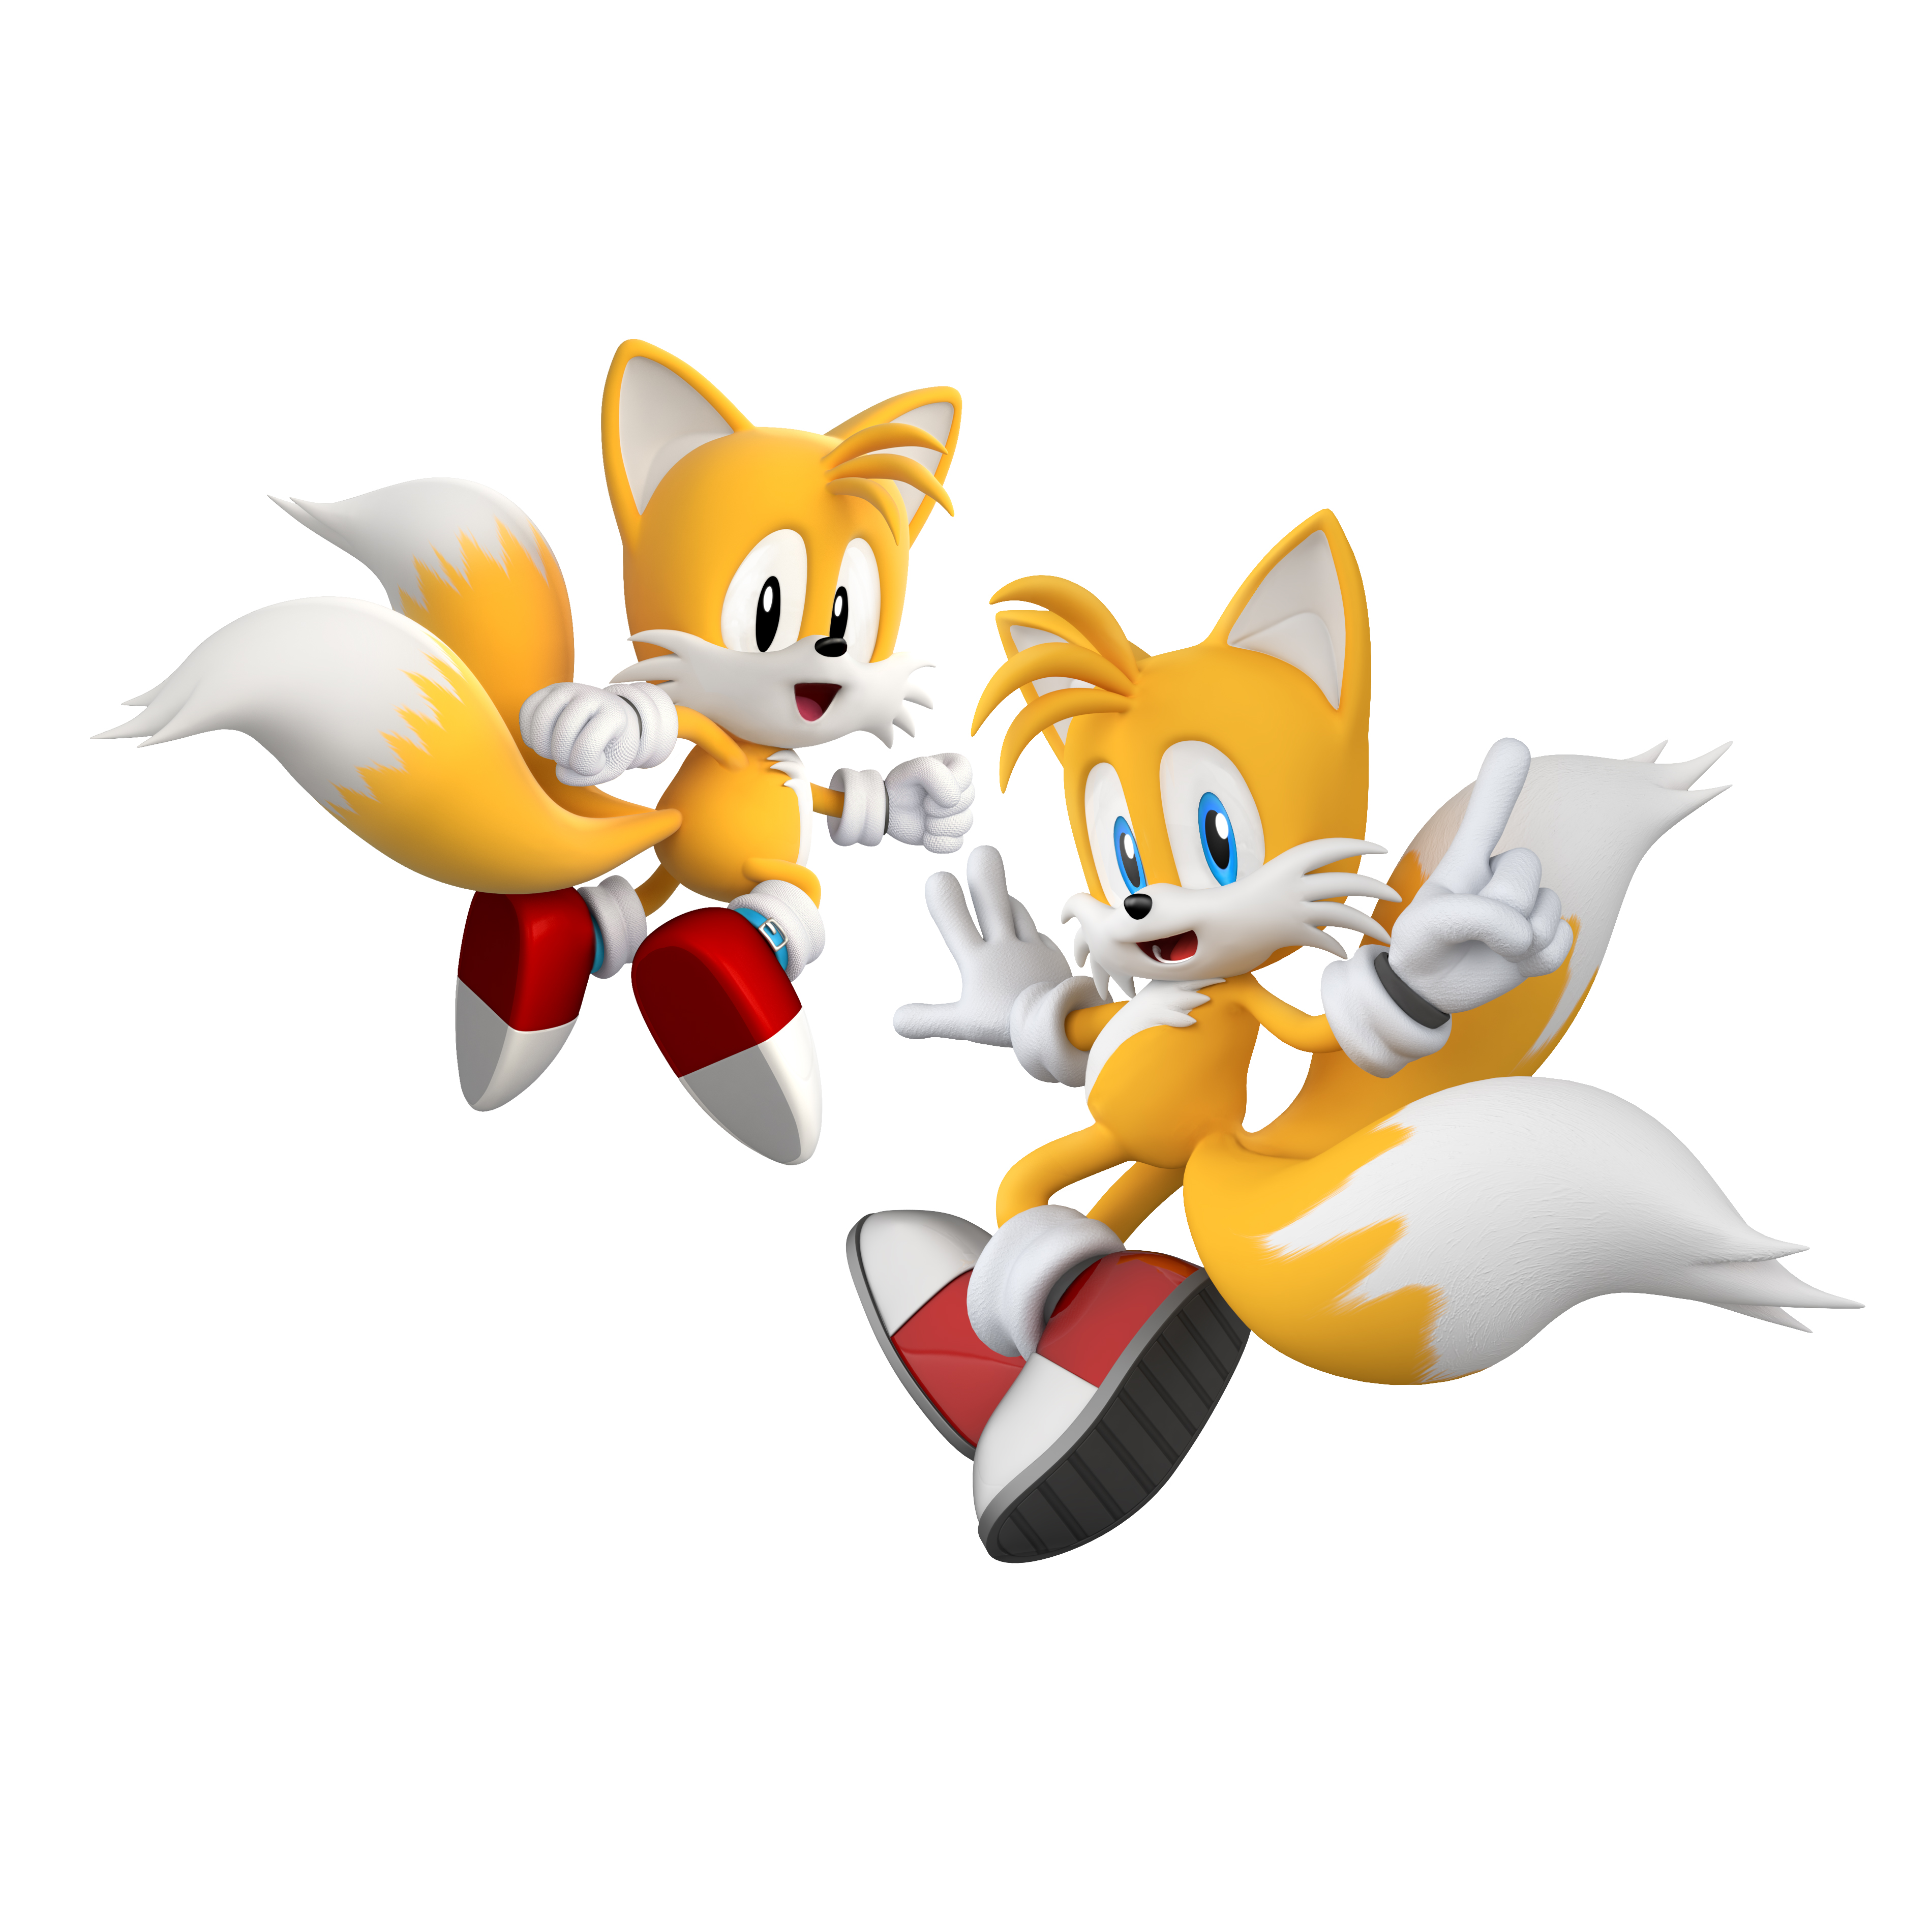 Tails screenshots, images and pictures - Giant Bomb